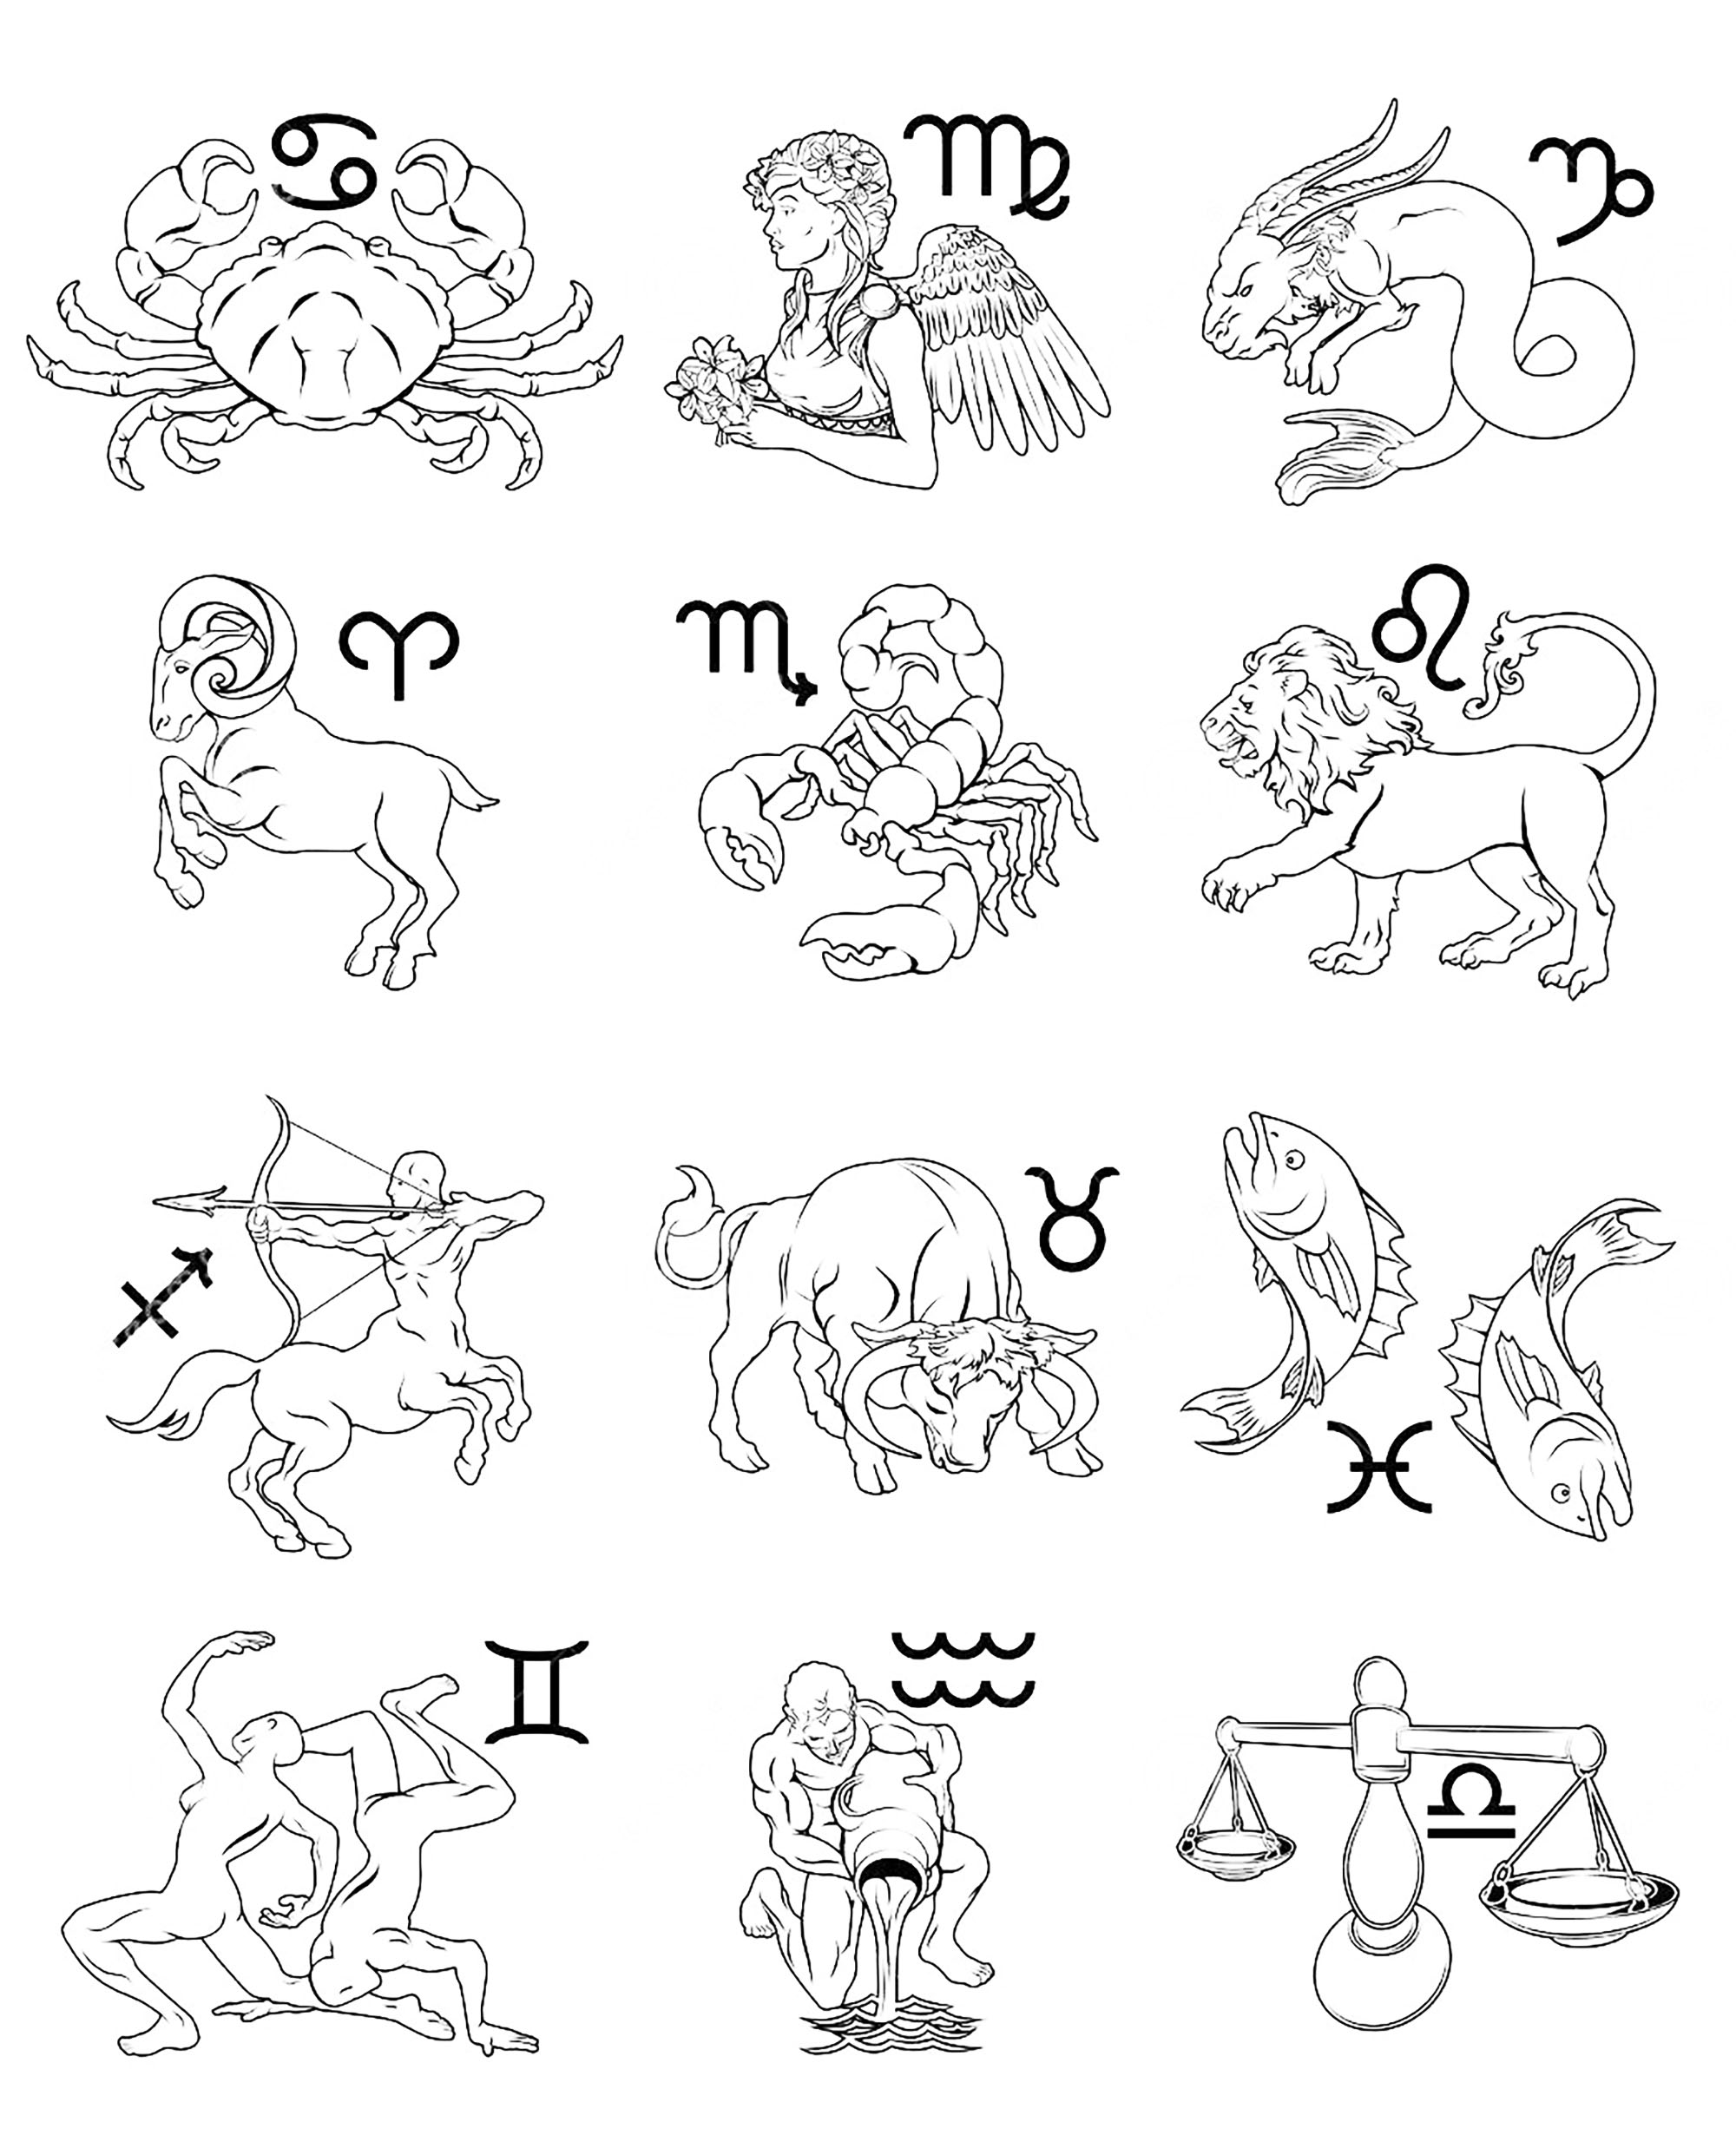 Free coloring pages of zodiac signs to color - Zodiac Signs Kids